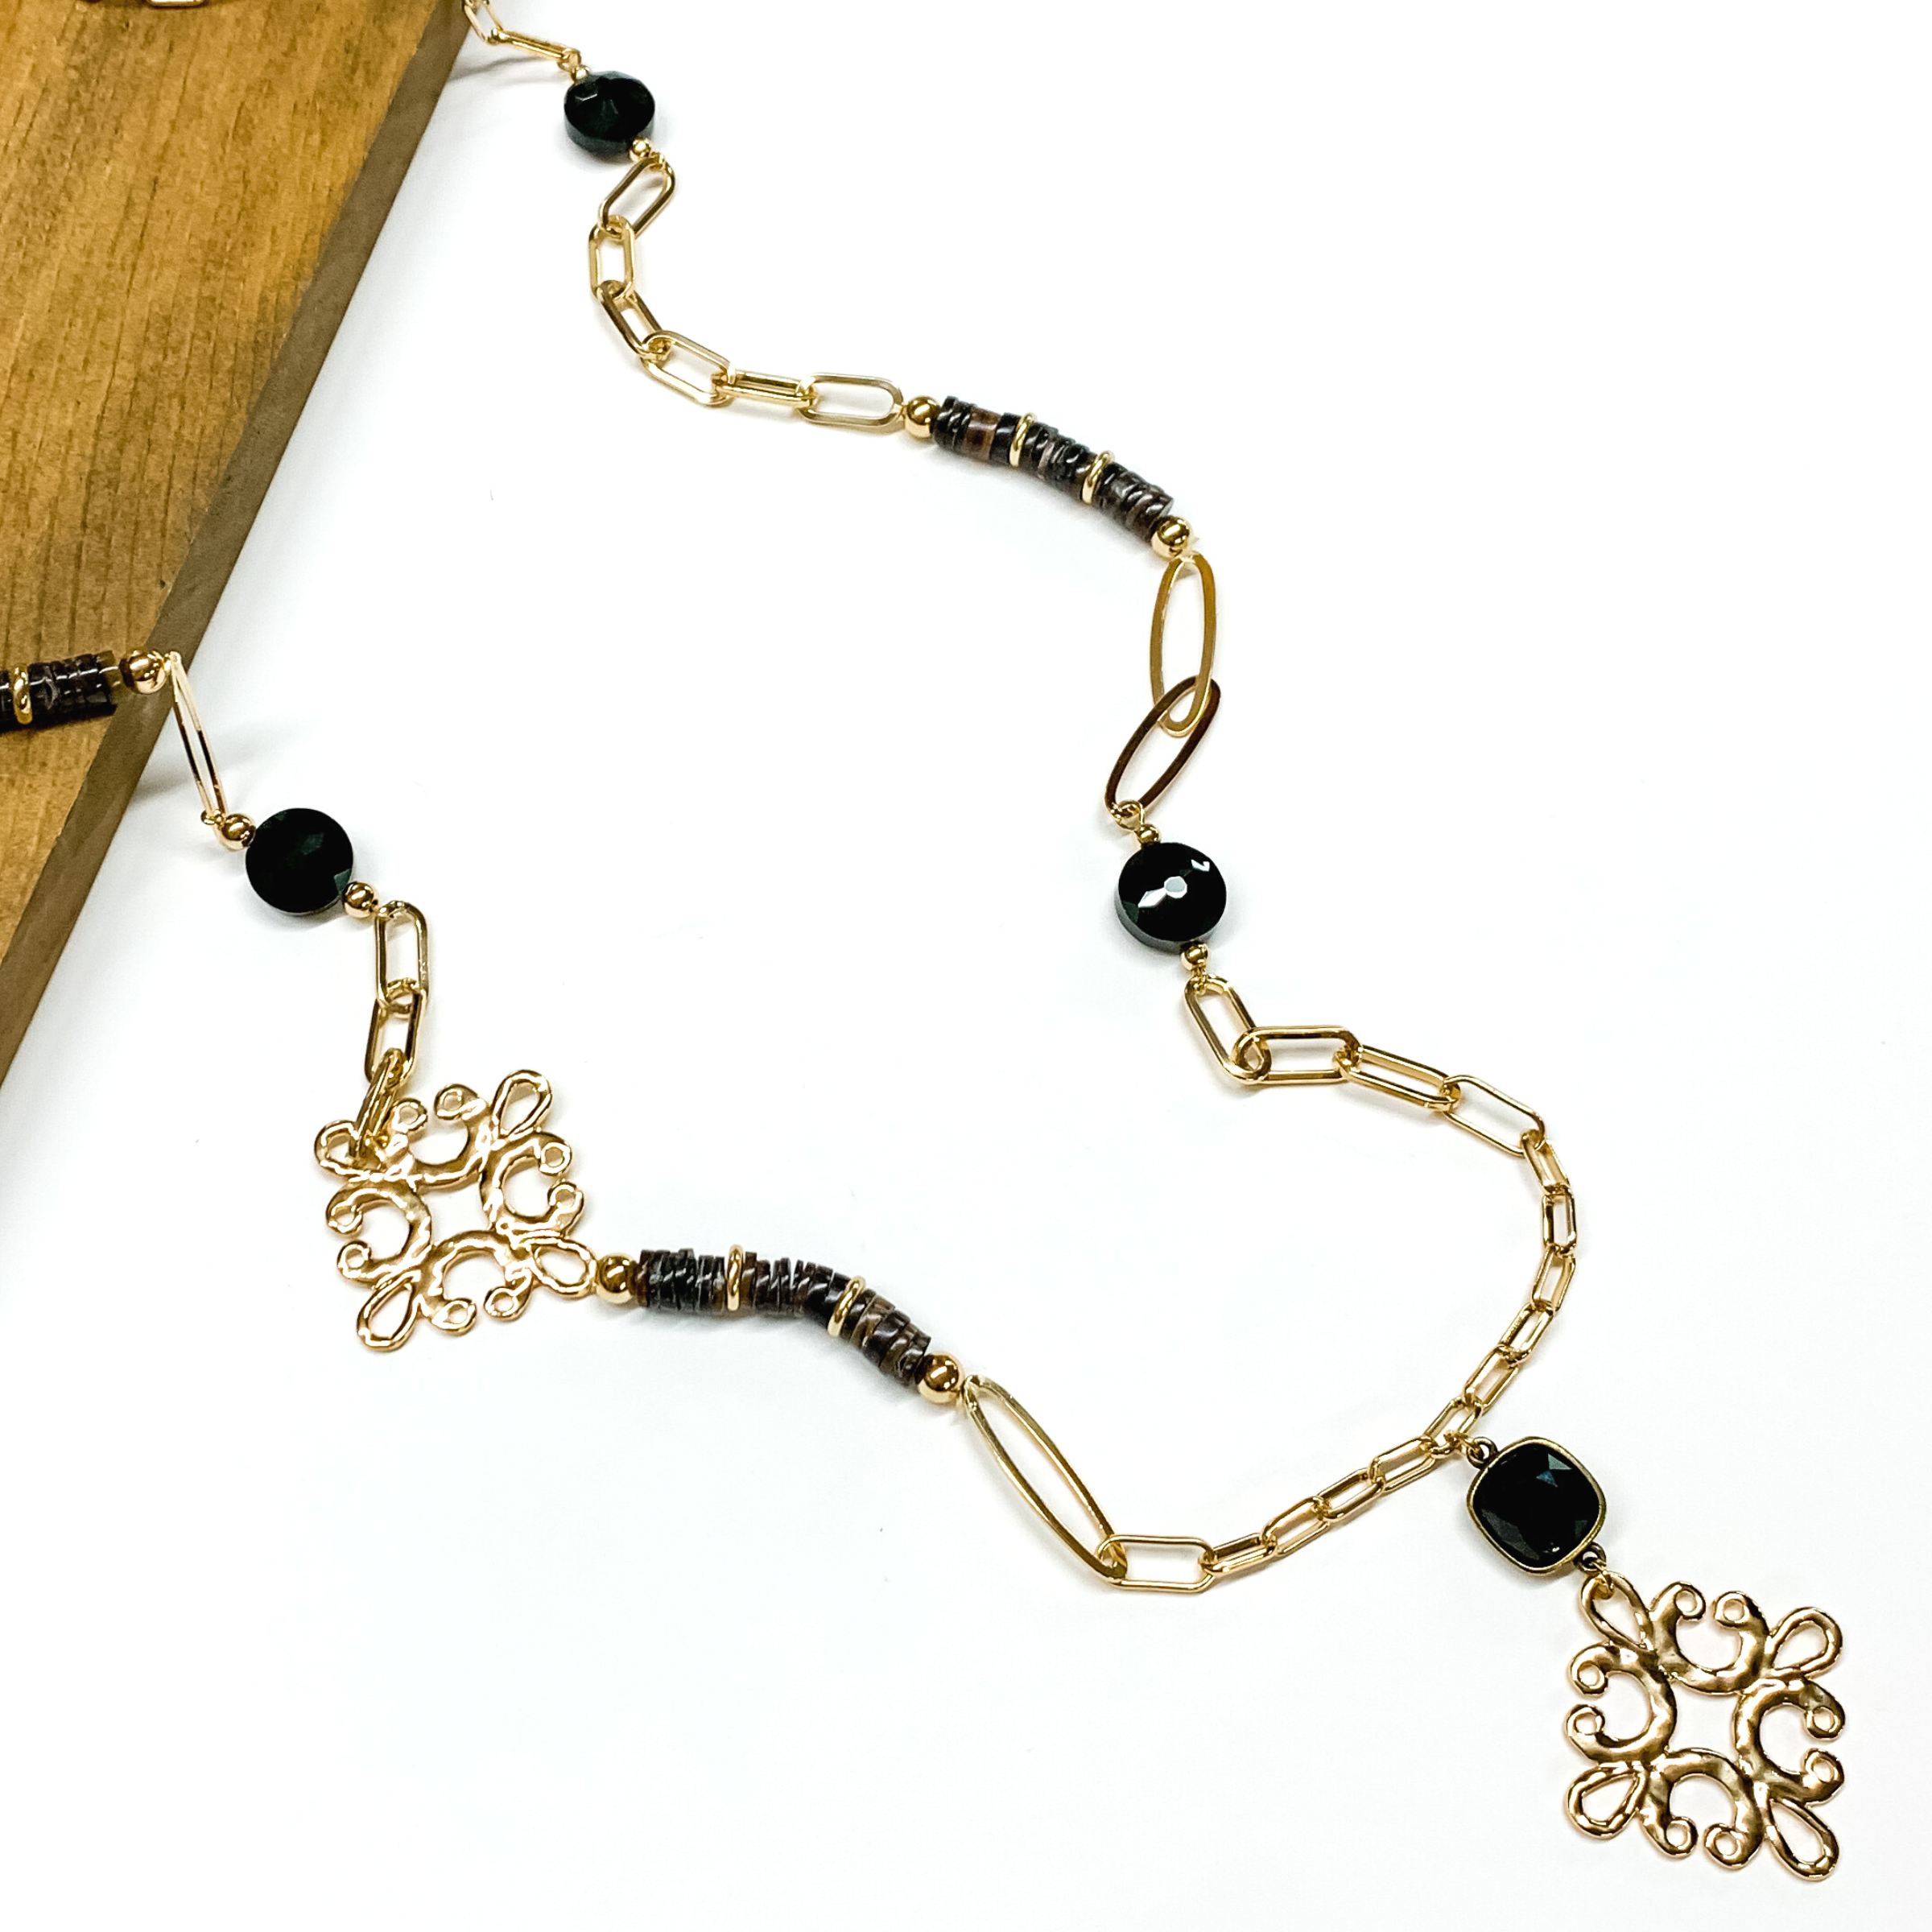 Gold paperclip chain and black beaded necklace. This necklace also includes a black crystal and gold quatrefoil drop. This necklace is pictured partially laying on a brown block on a white background. 